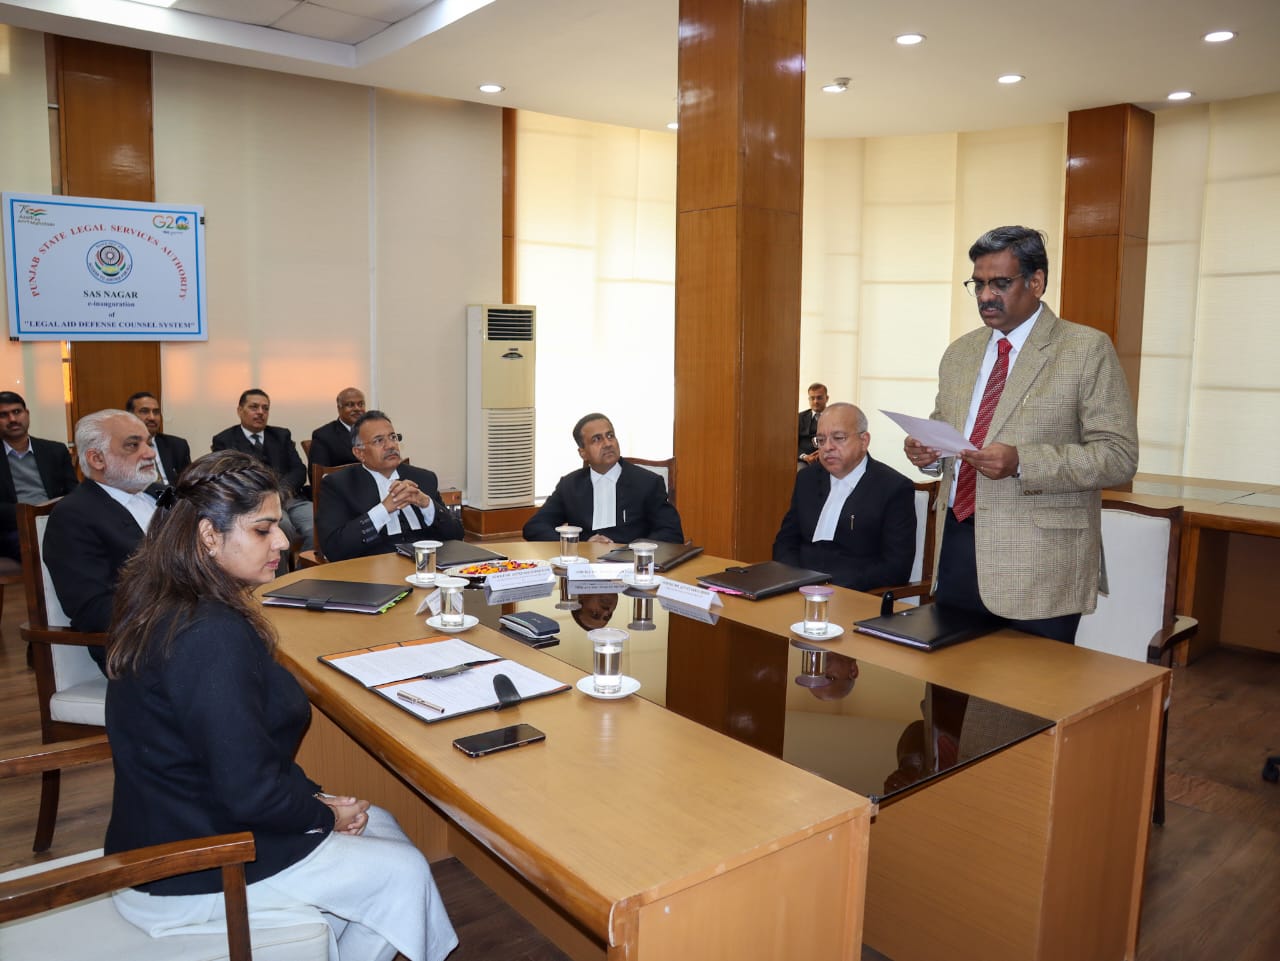 Virtual inauguration of LADCs offices by Hon'ble the Chief Justice Ravi Shanker Jha, Chief Justice and Hon'ble Mr. Justice Tejinder Singh Dhindsa, Executive Chairman, PSLSA alongwith other Hon'ble Judges of High Court of Punjab & Haryana